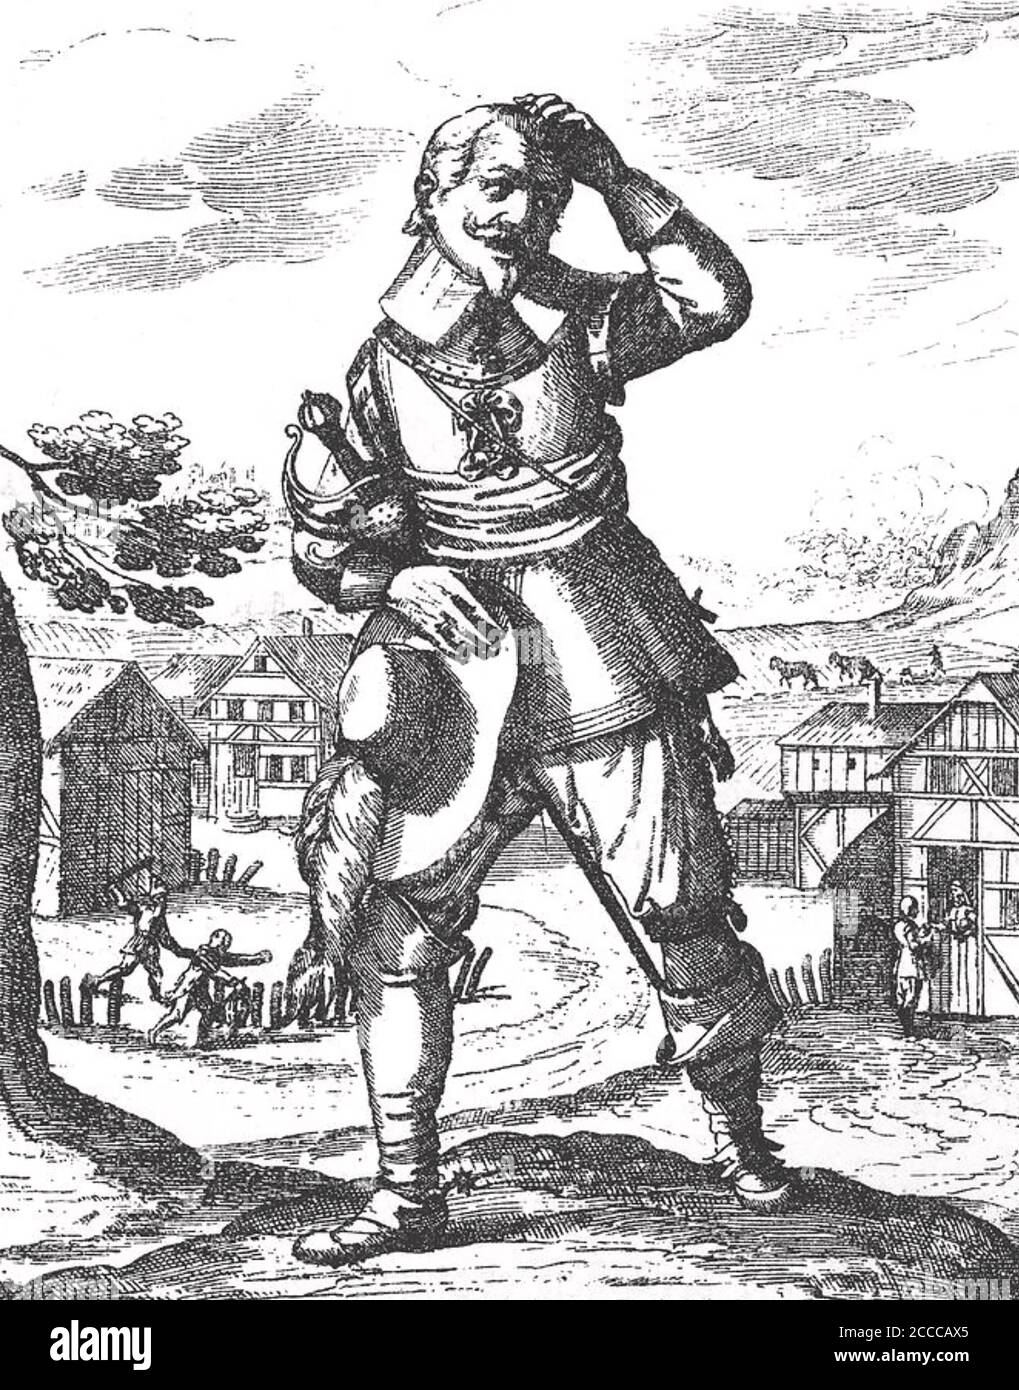 JOHANN TSERCLAES (1559-1632) Brabant-born soldier and commander of the Catholic League's forces in the Thirty Years War Stock Photo